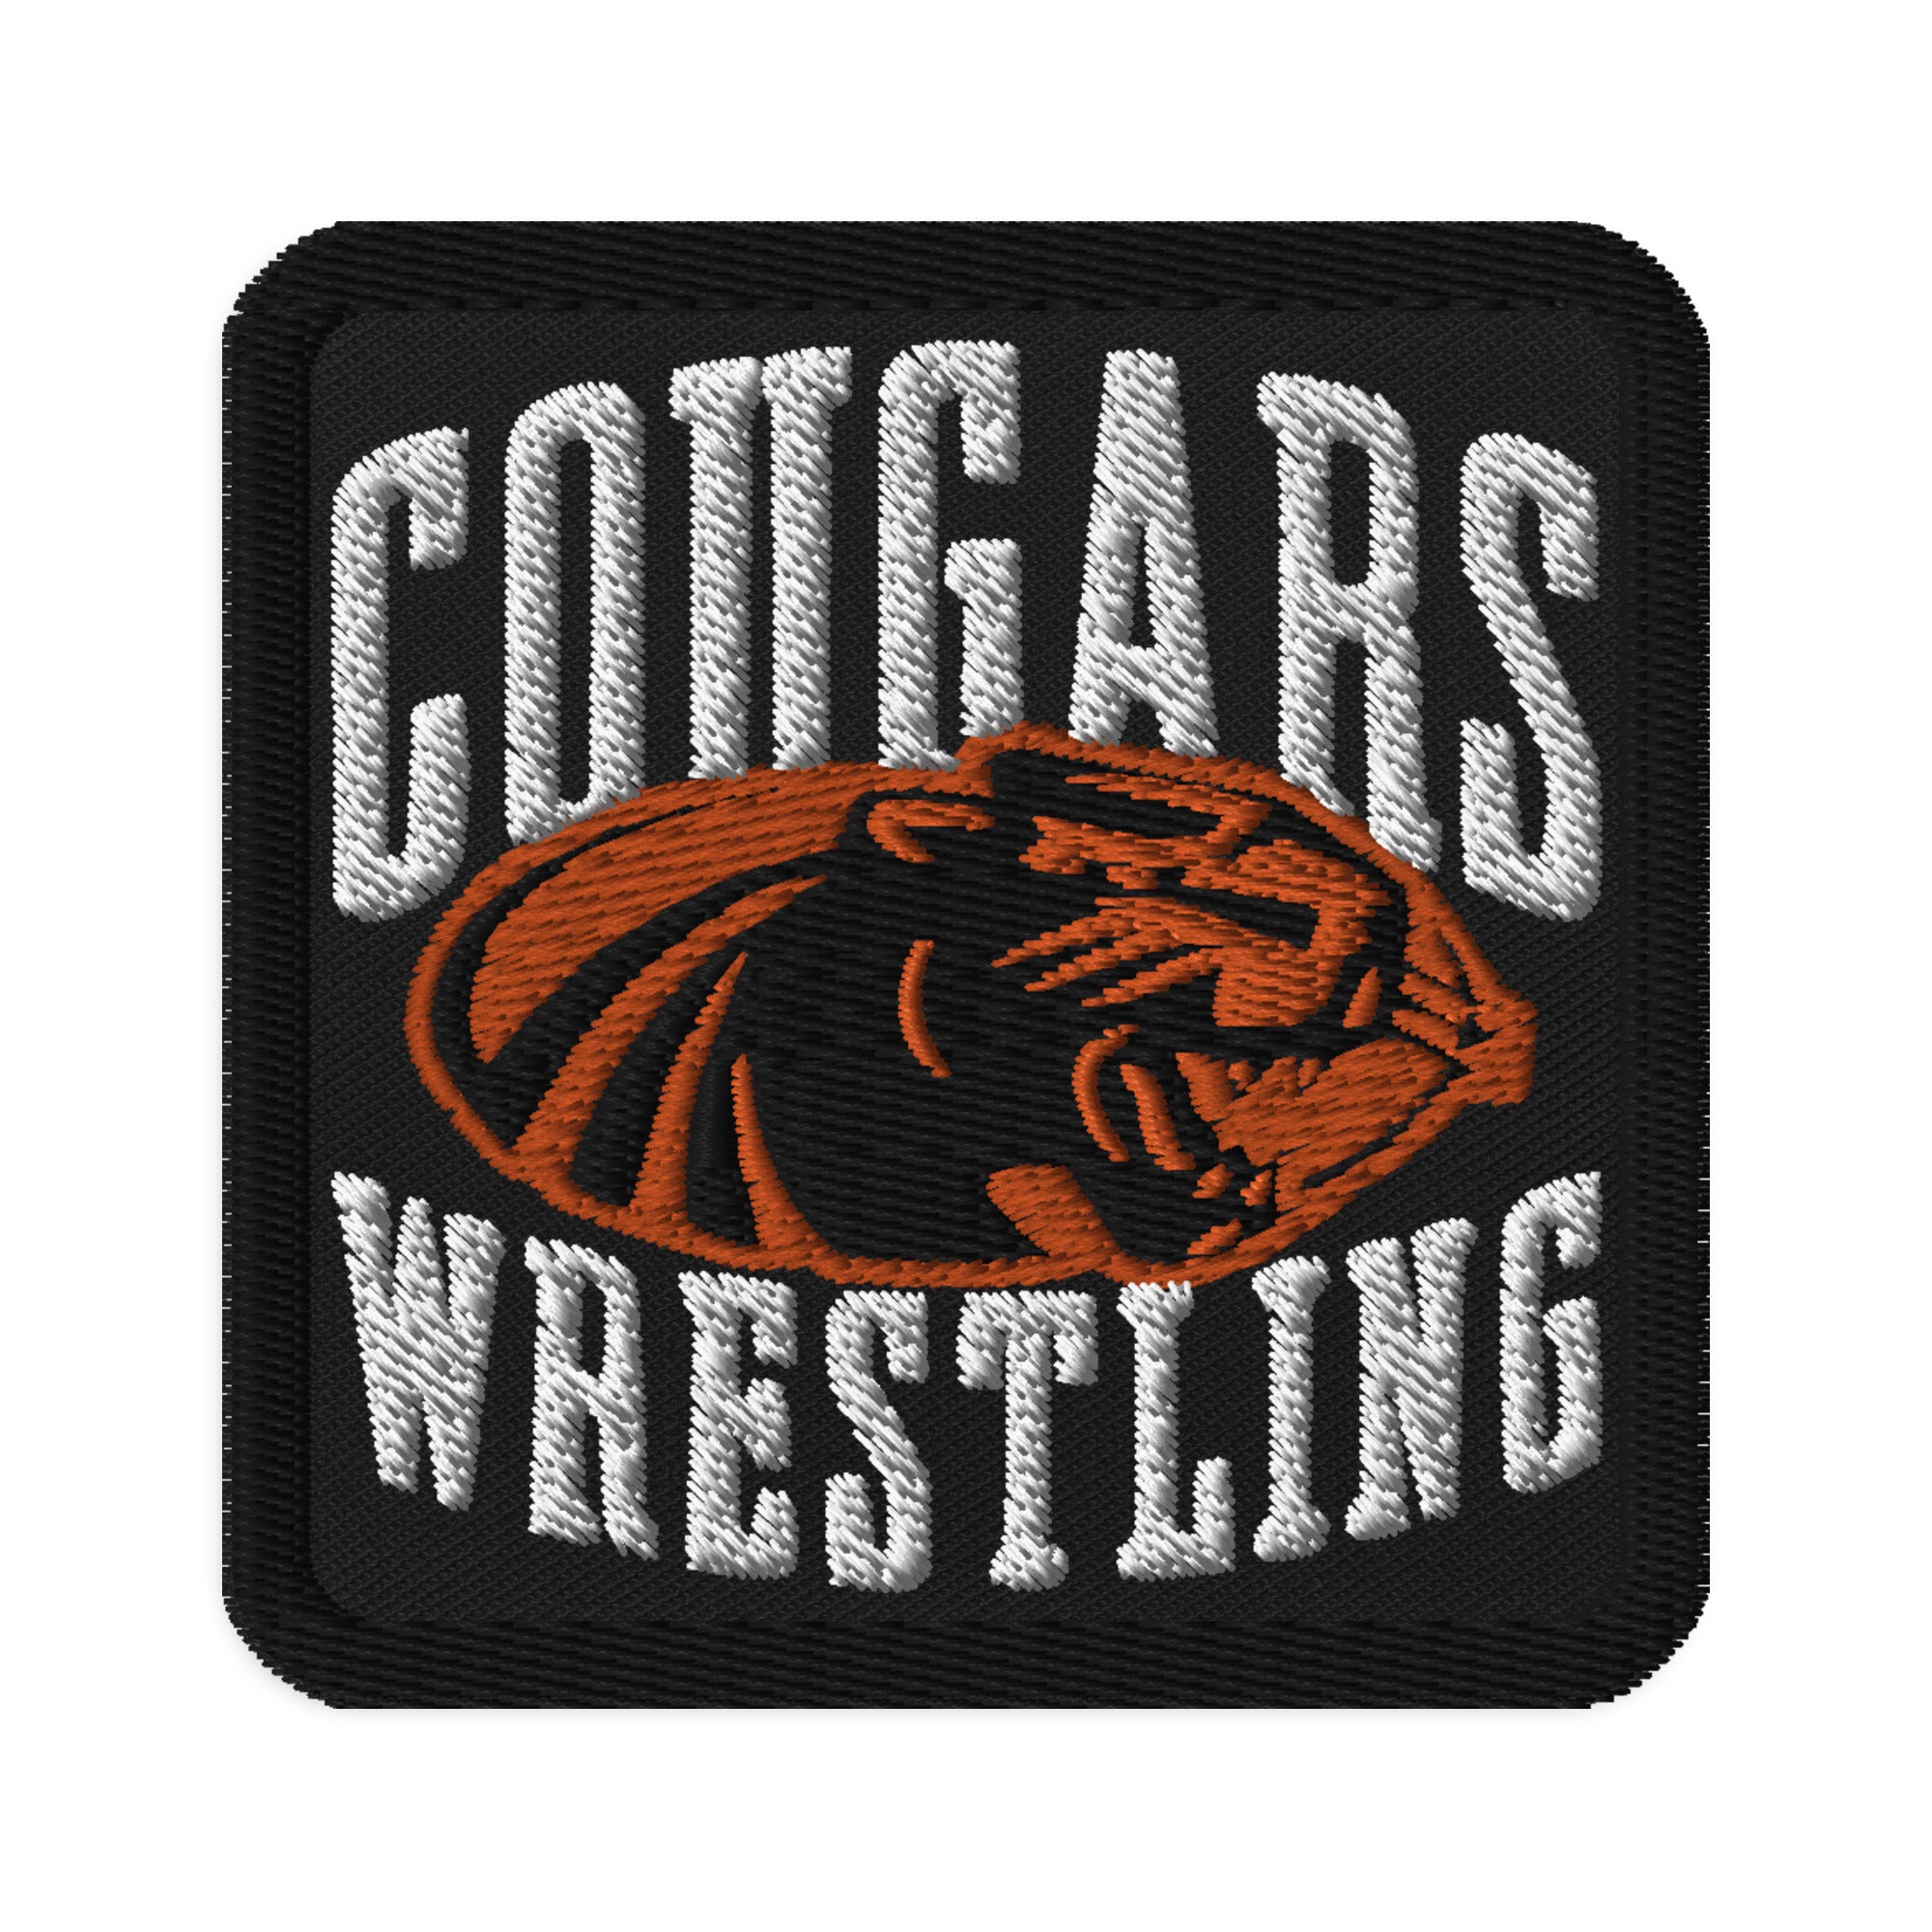 Half Moon Bay Wrestling Embroidered Patches